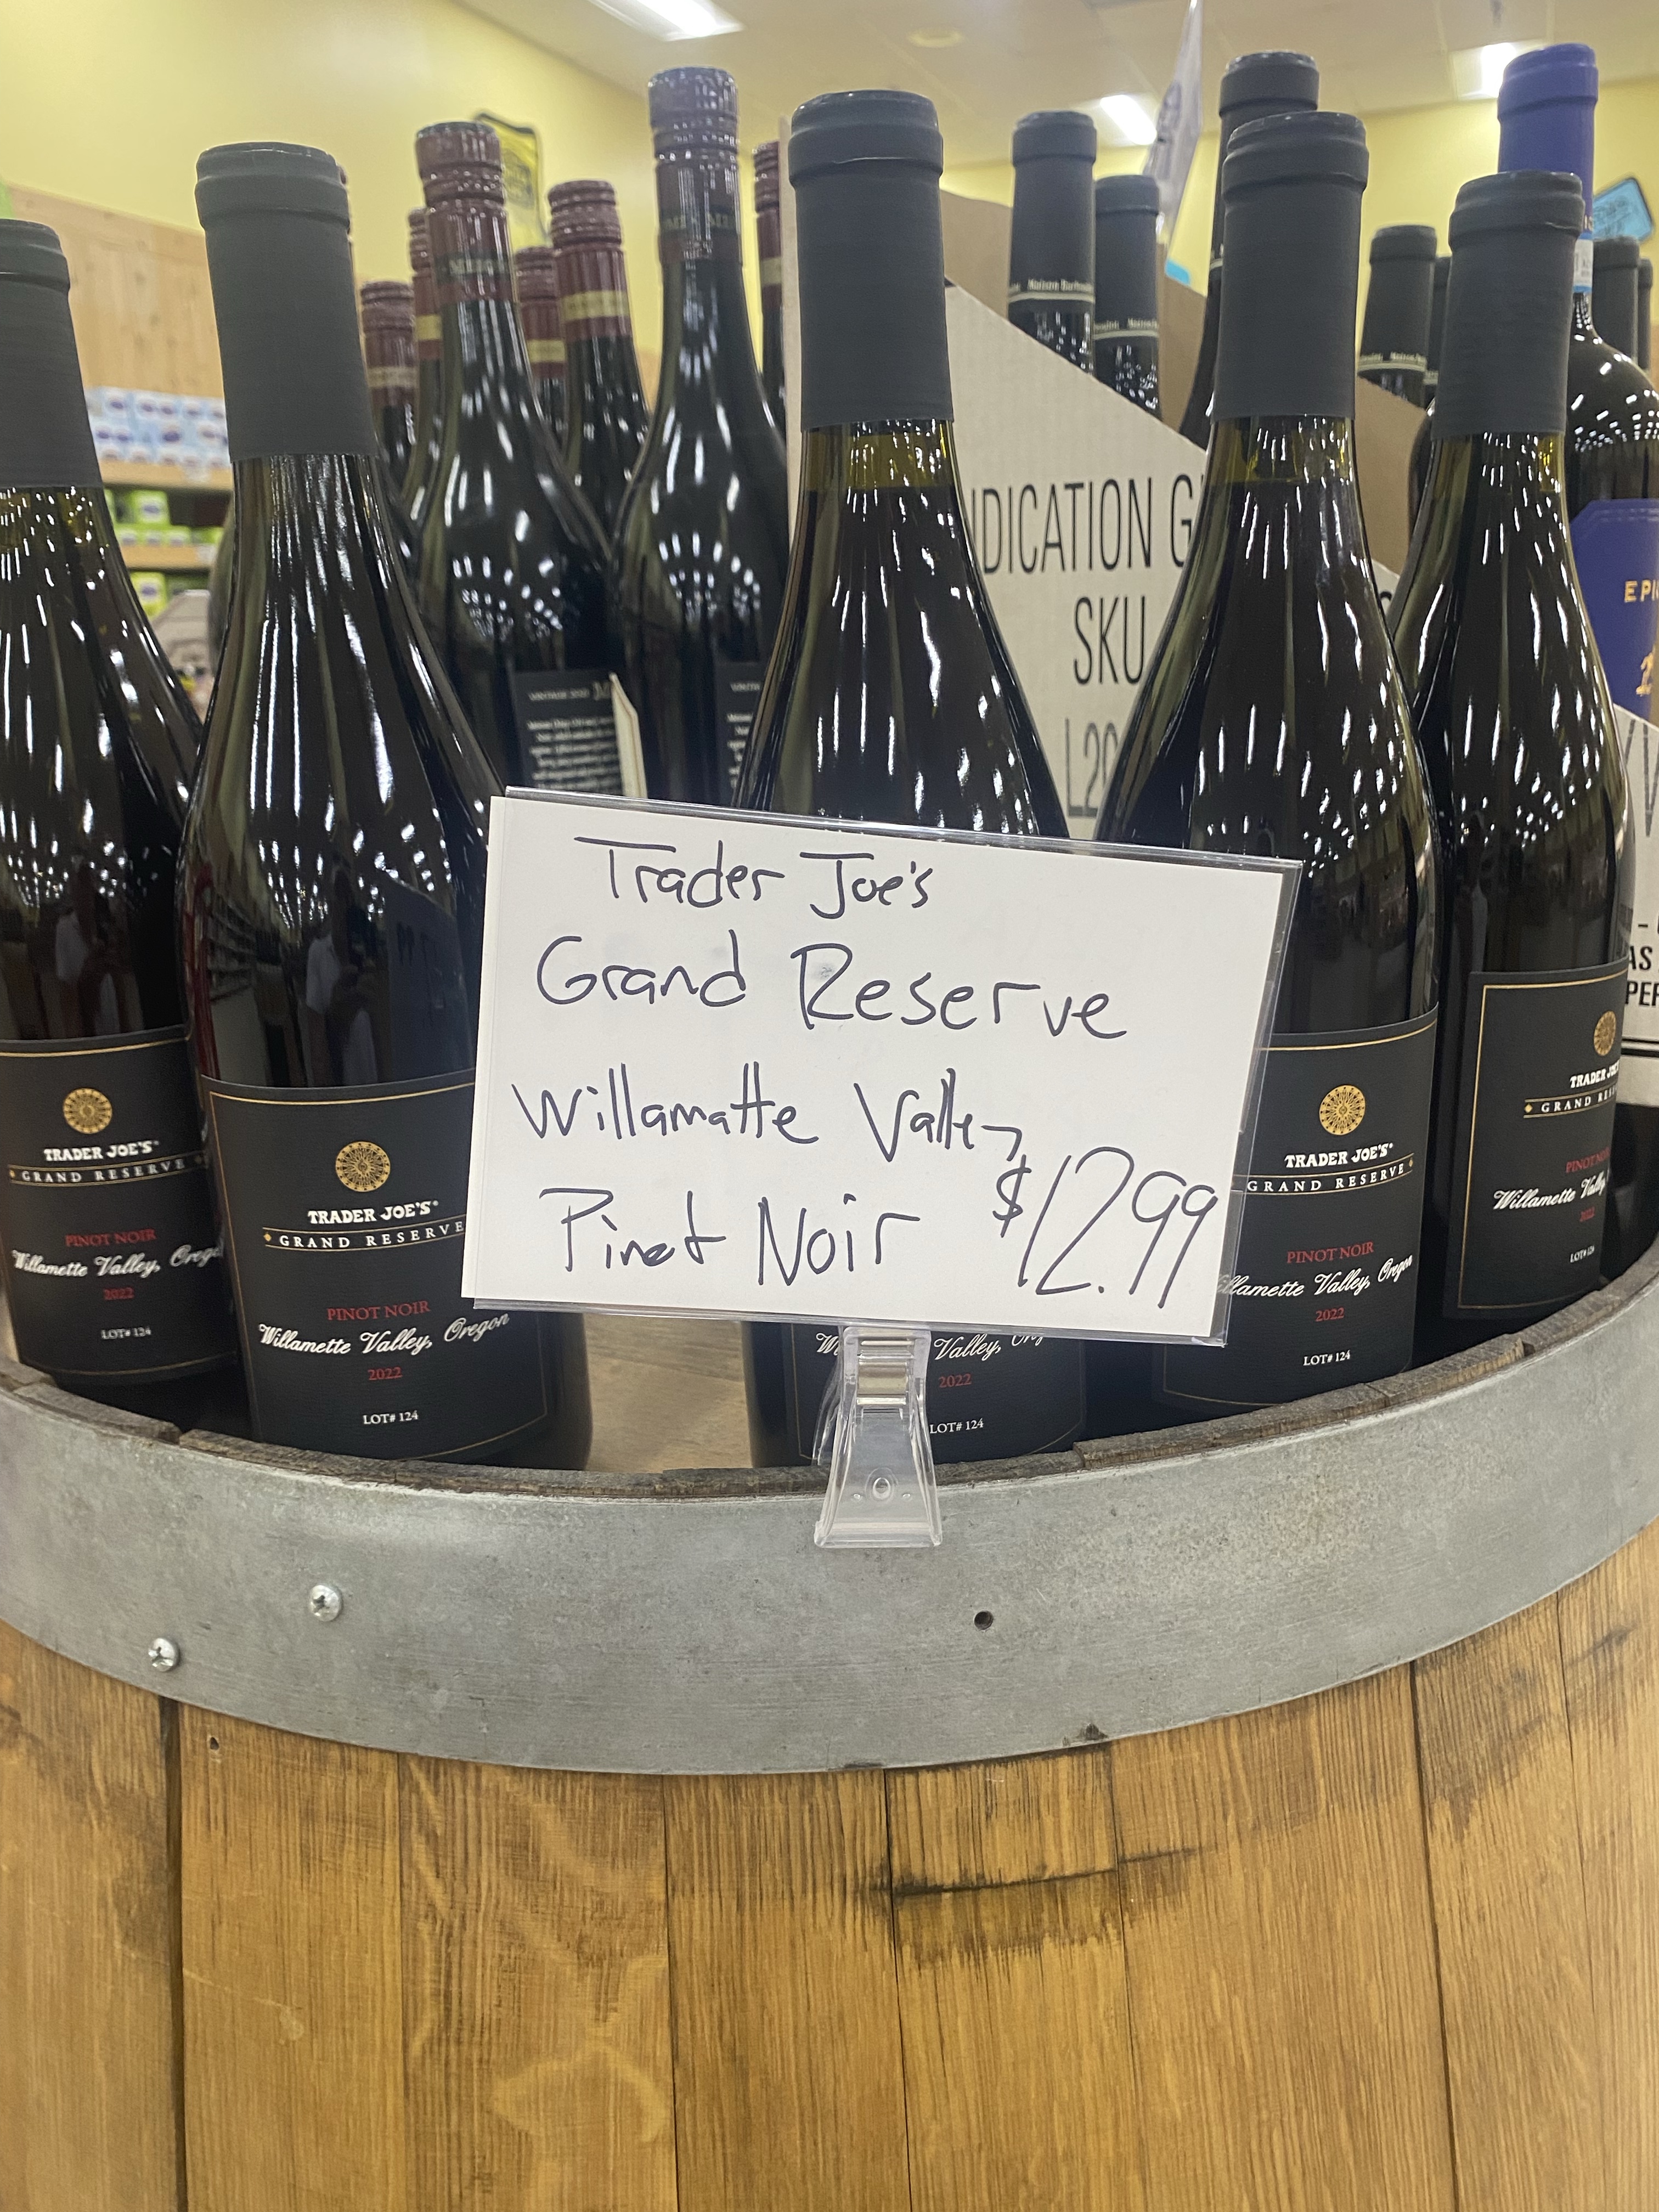 Store display for thie 2022 Pinot Noir, Trader Joe's Grand Reserve Lot #124, Willamette Valley, Oregon  $12.99